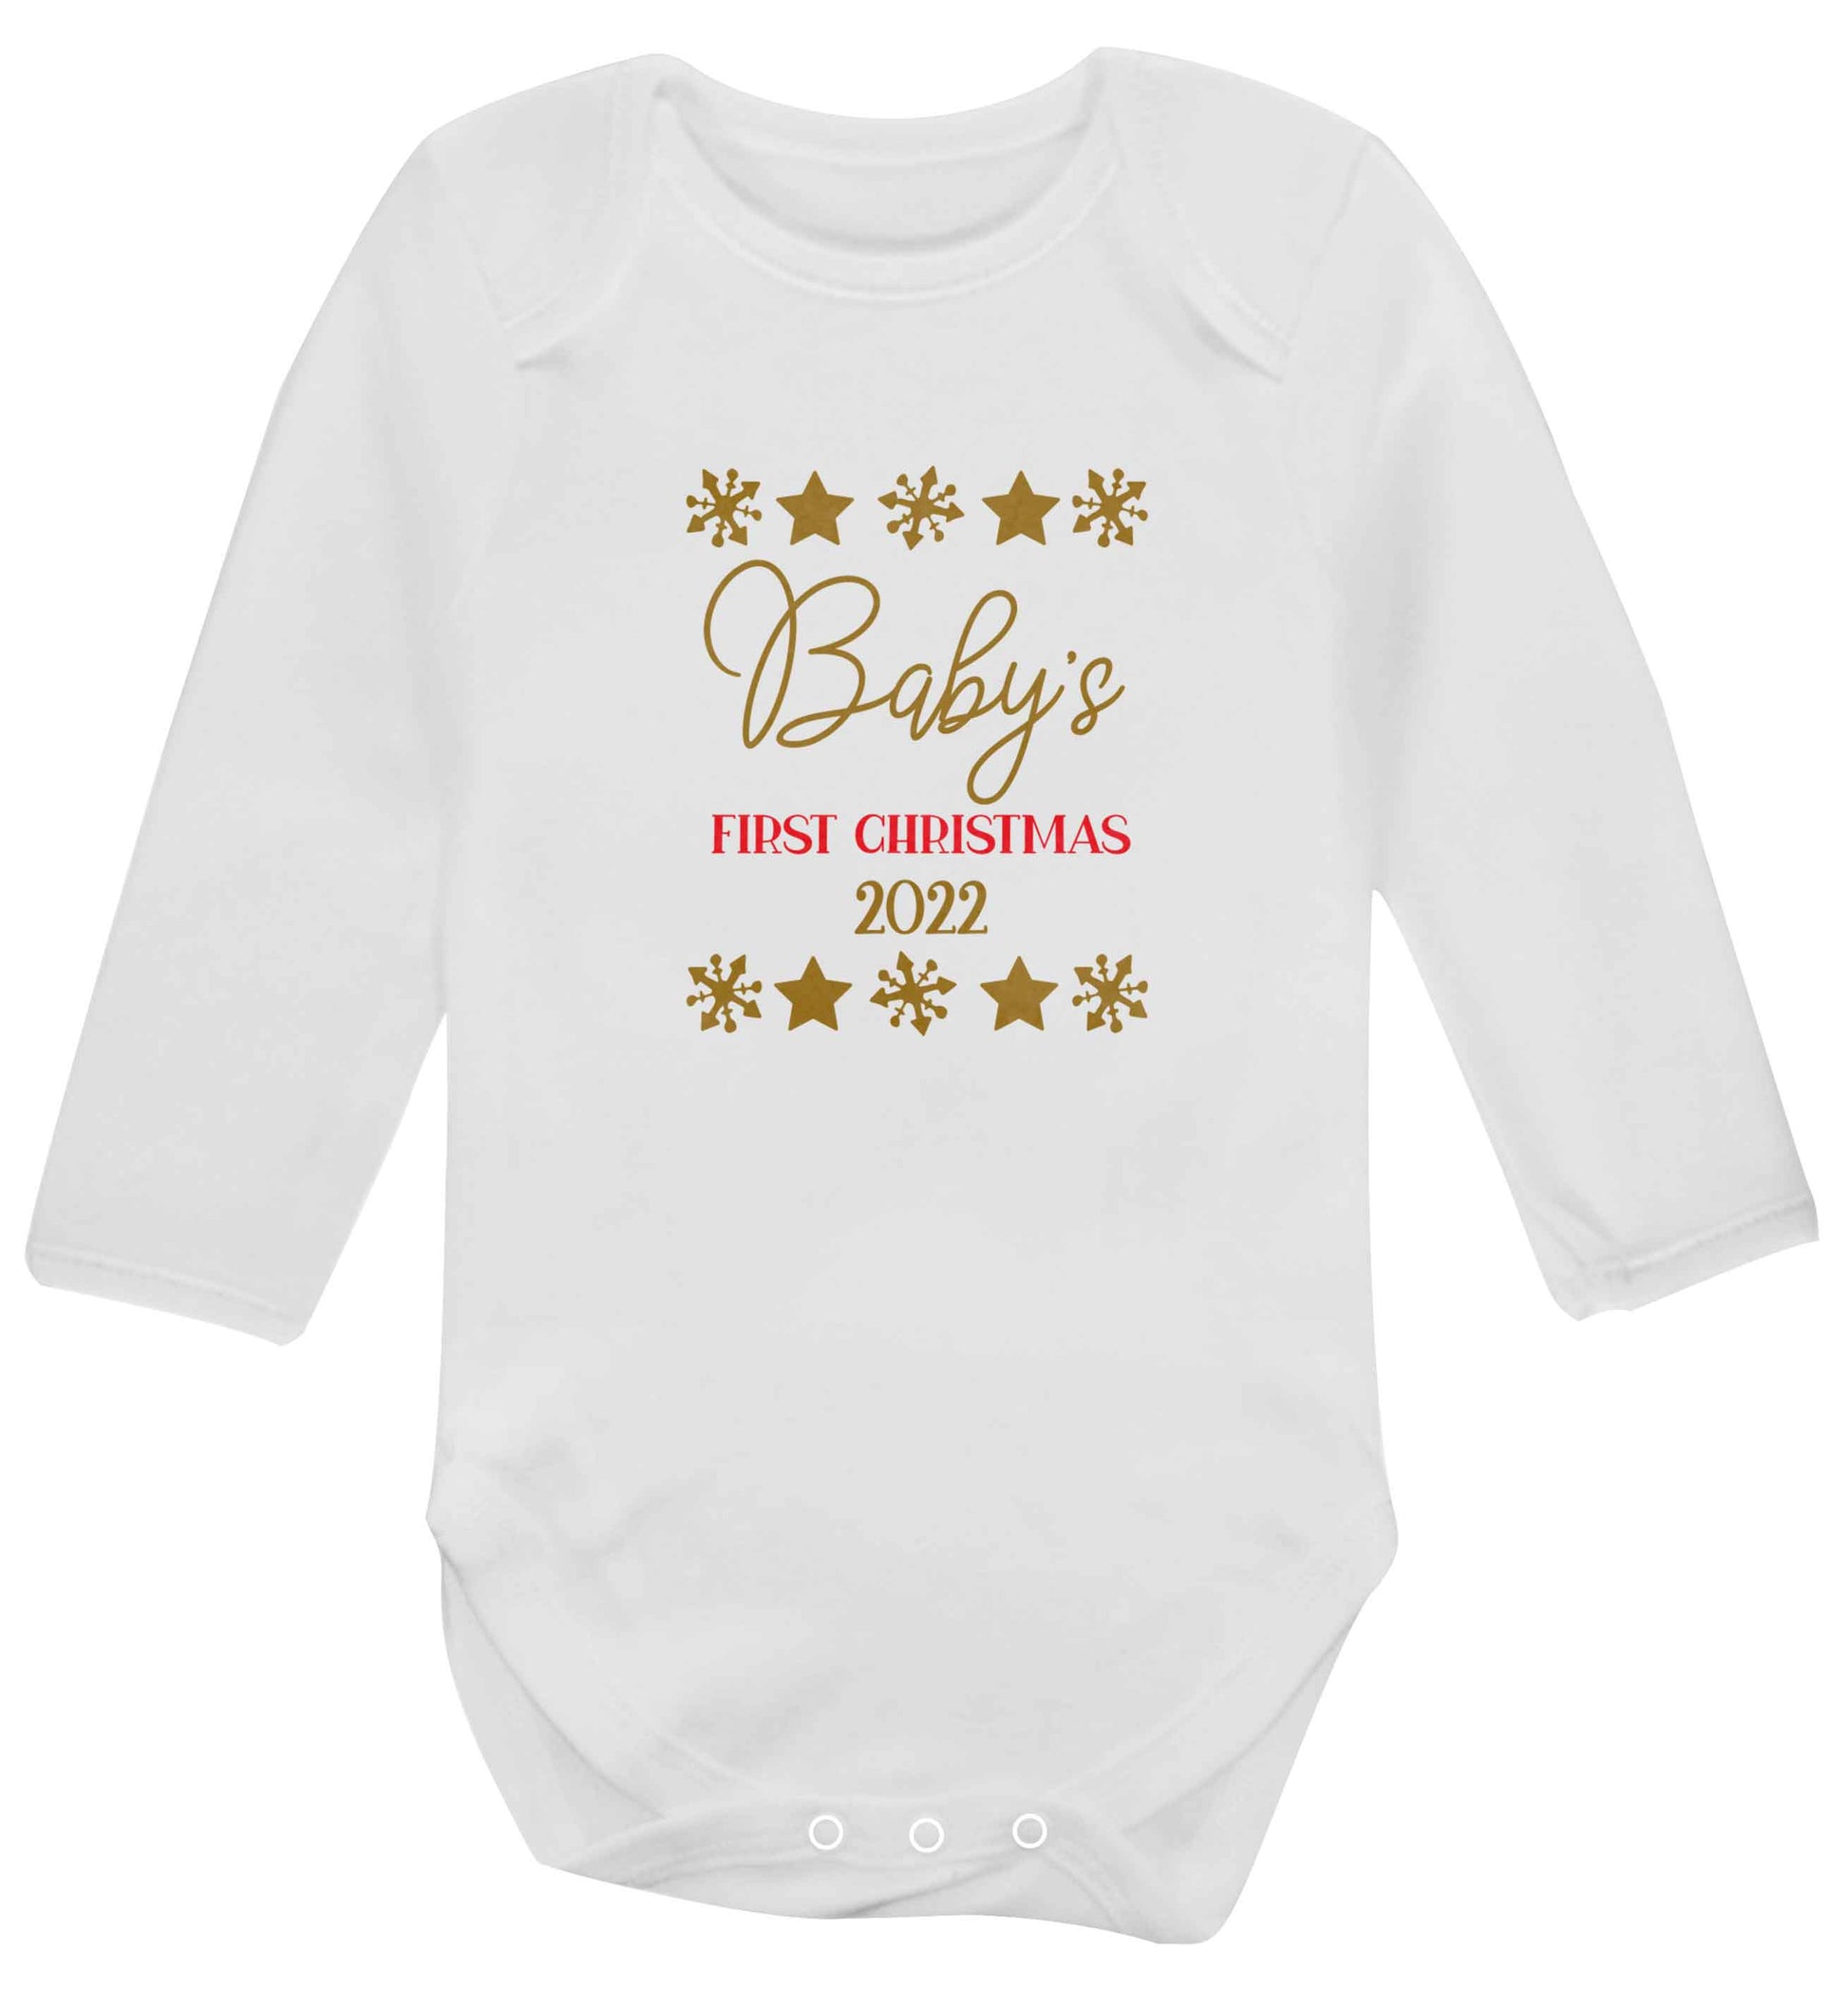 Baby's first Christmas baby vest long sleeved white 6-12 months